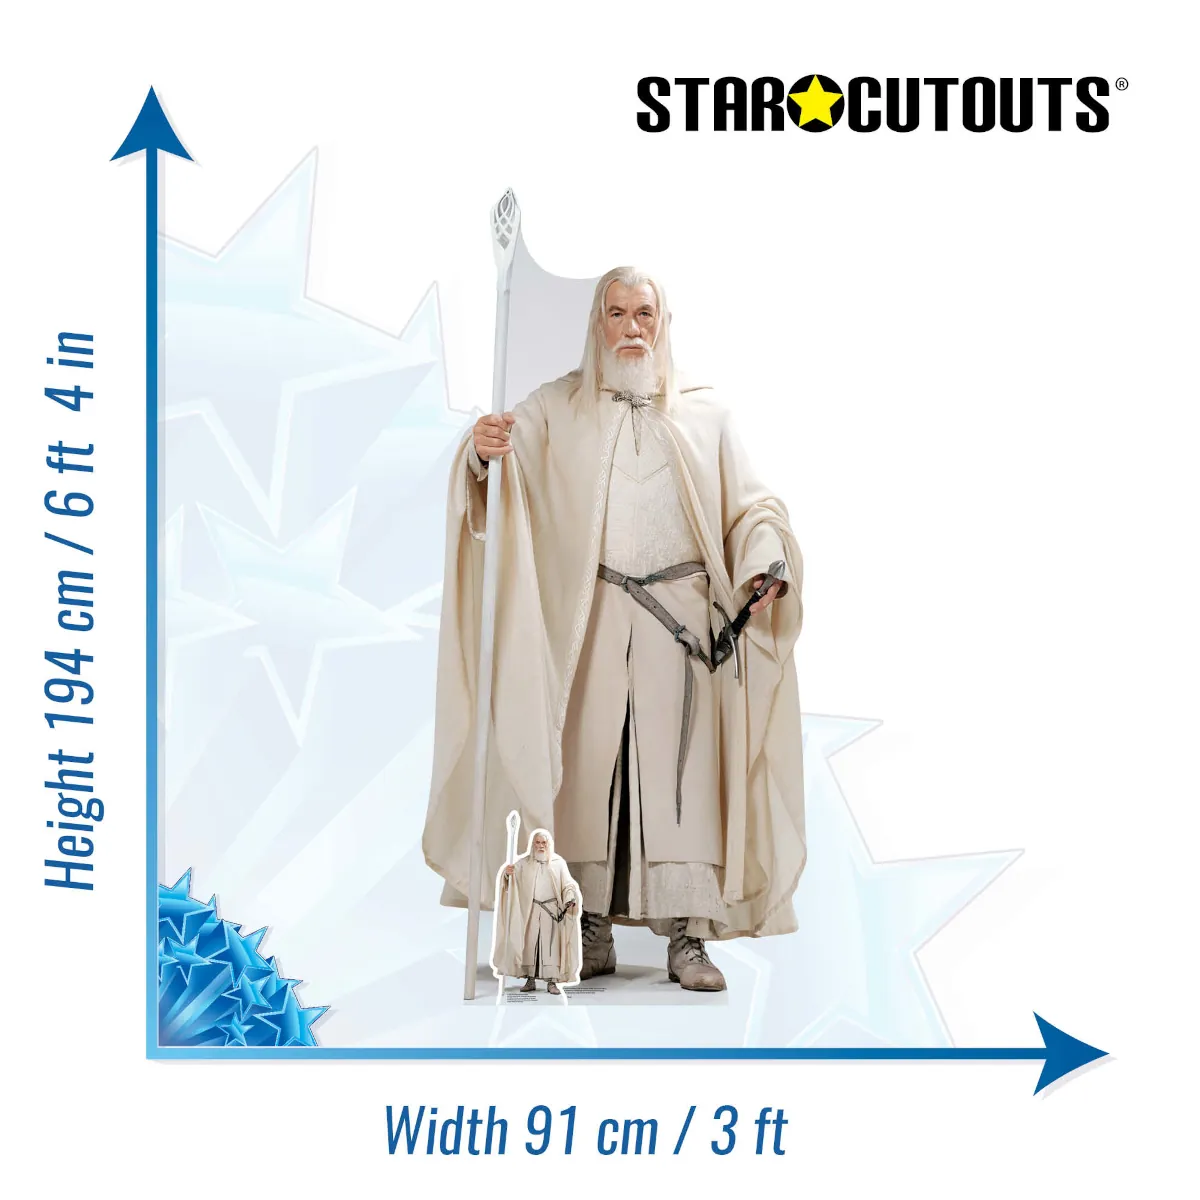 SC4132 Gandalf (The Lord of the Rings) Official Lifesize + Mini Cardboard Cutout Standee Size